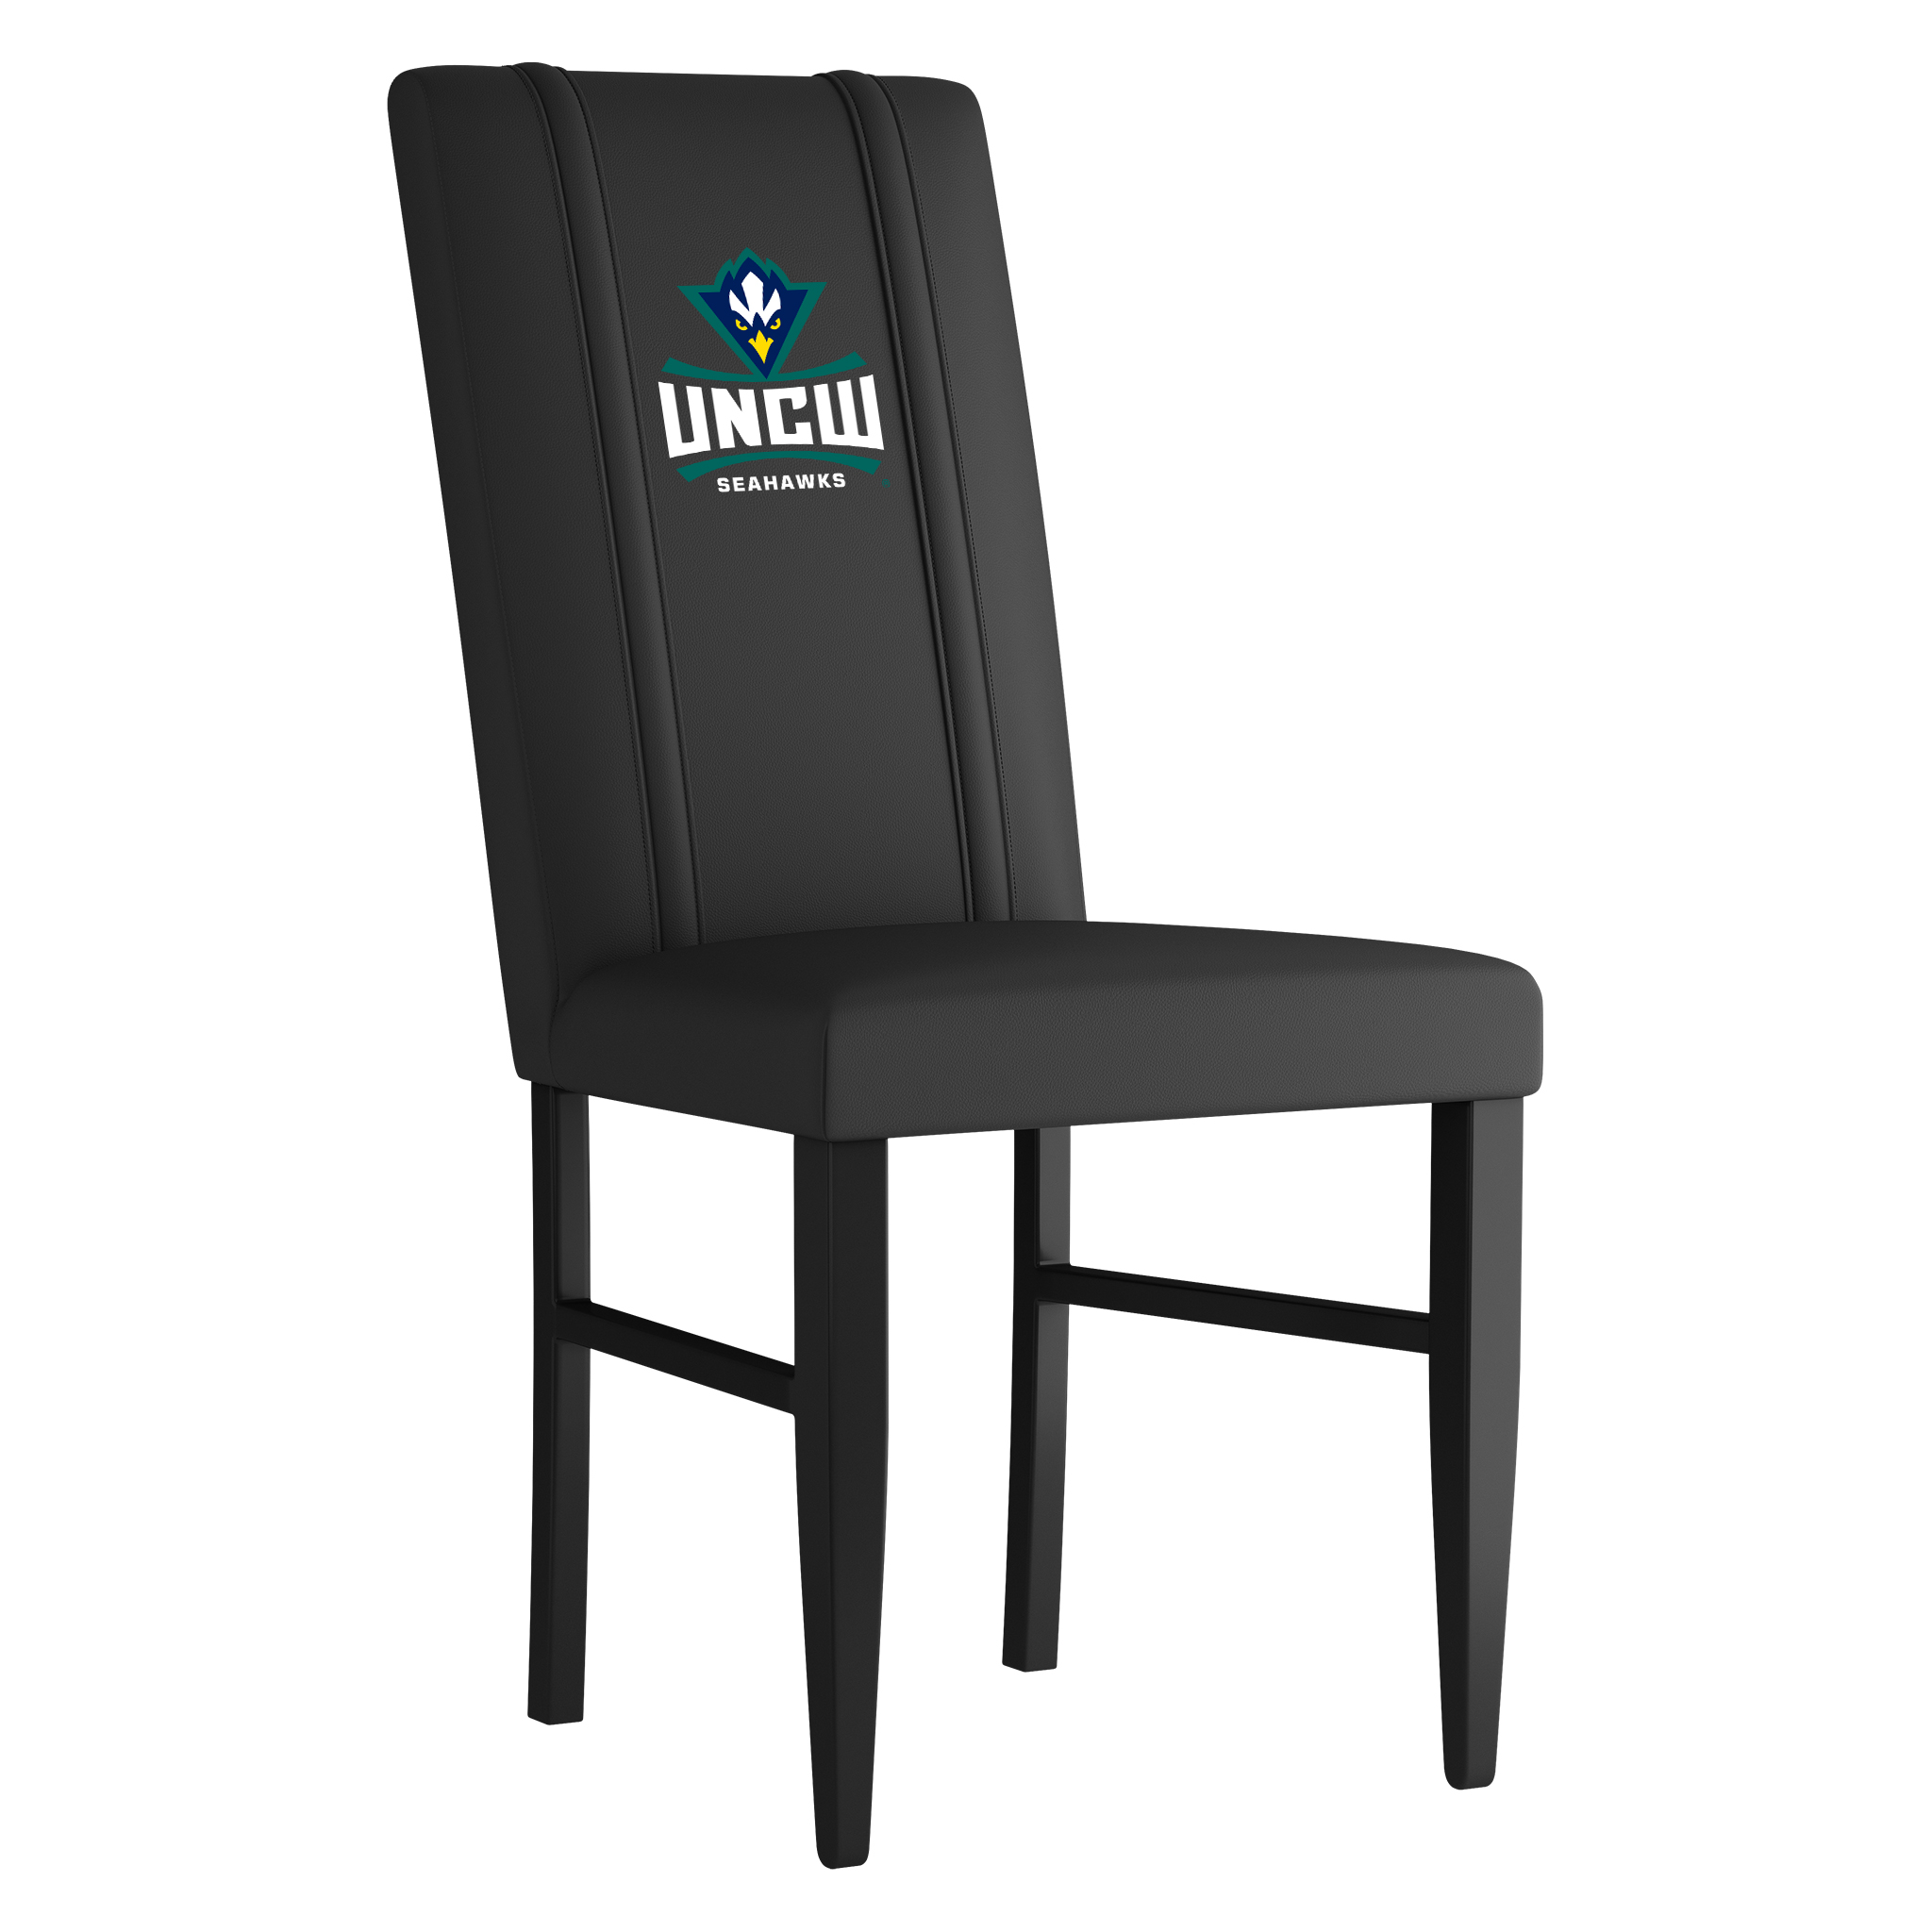 Uncw Side Chair 2000 With Uncw Primary Logo